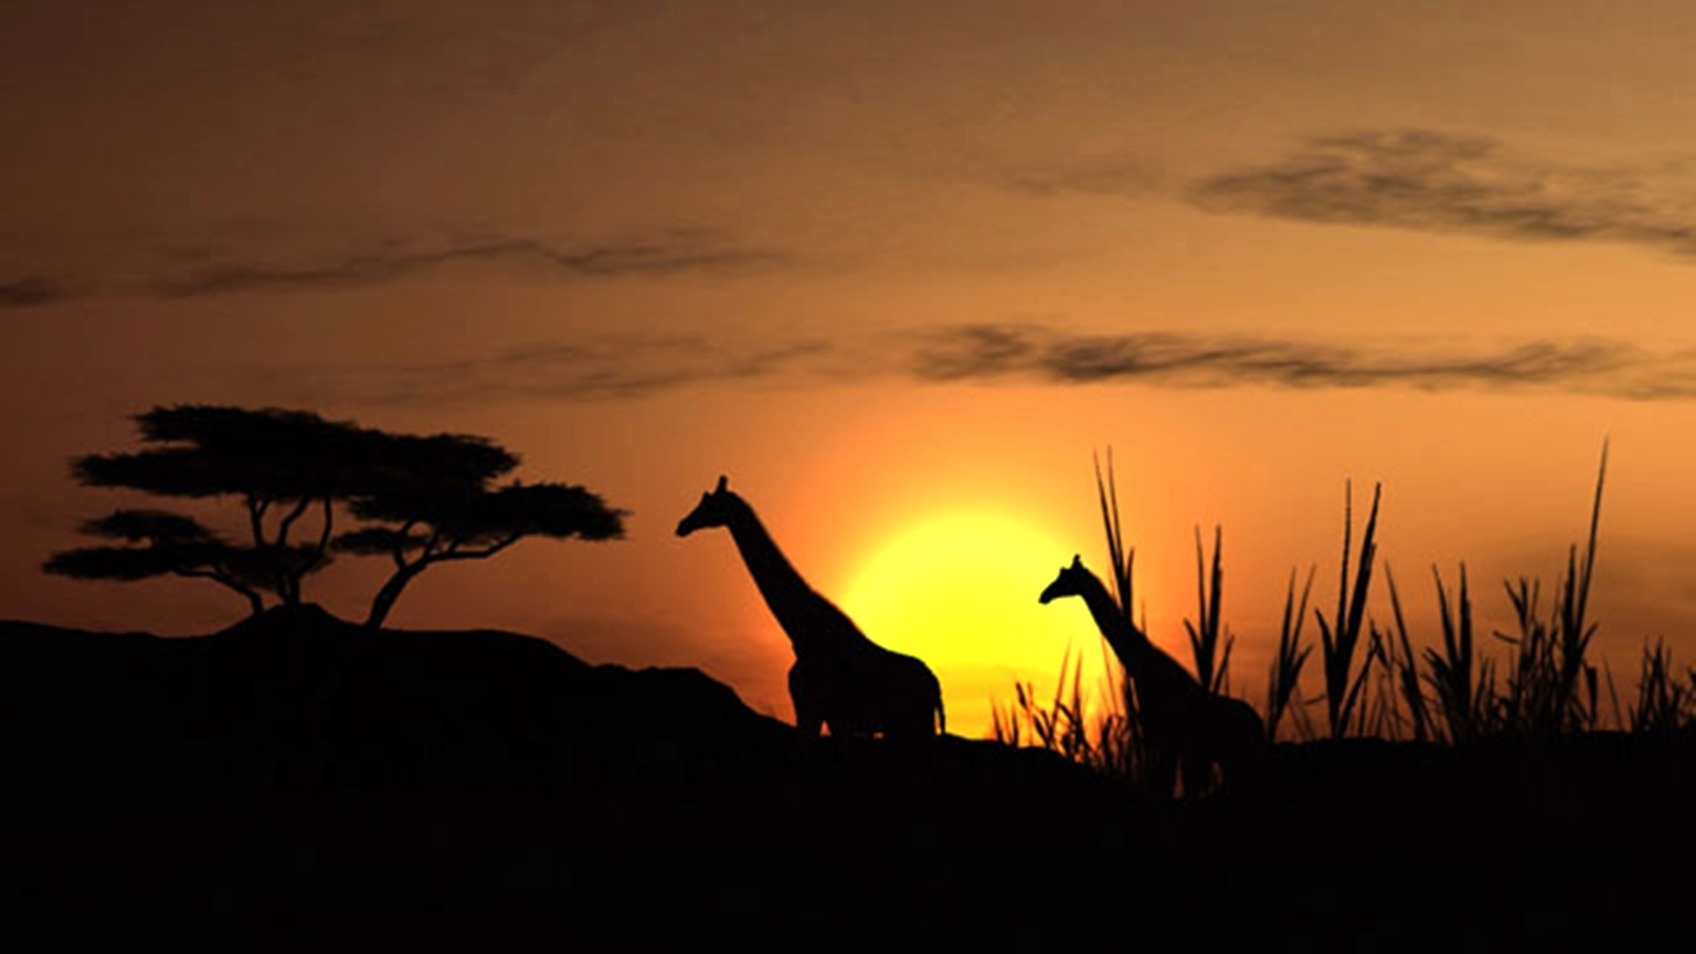 silhouette of giraffe and trees